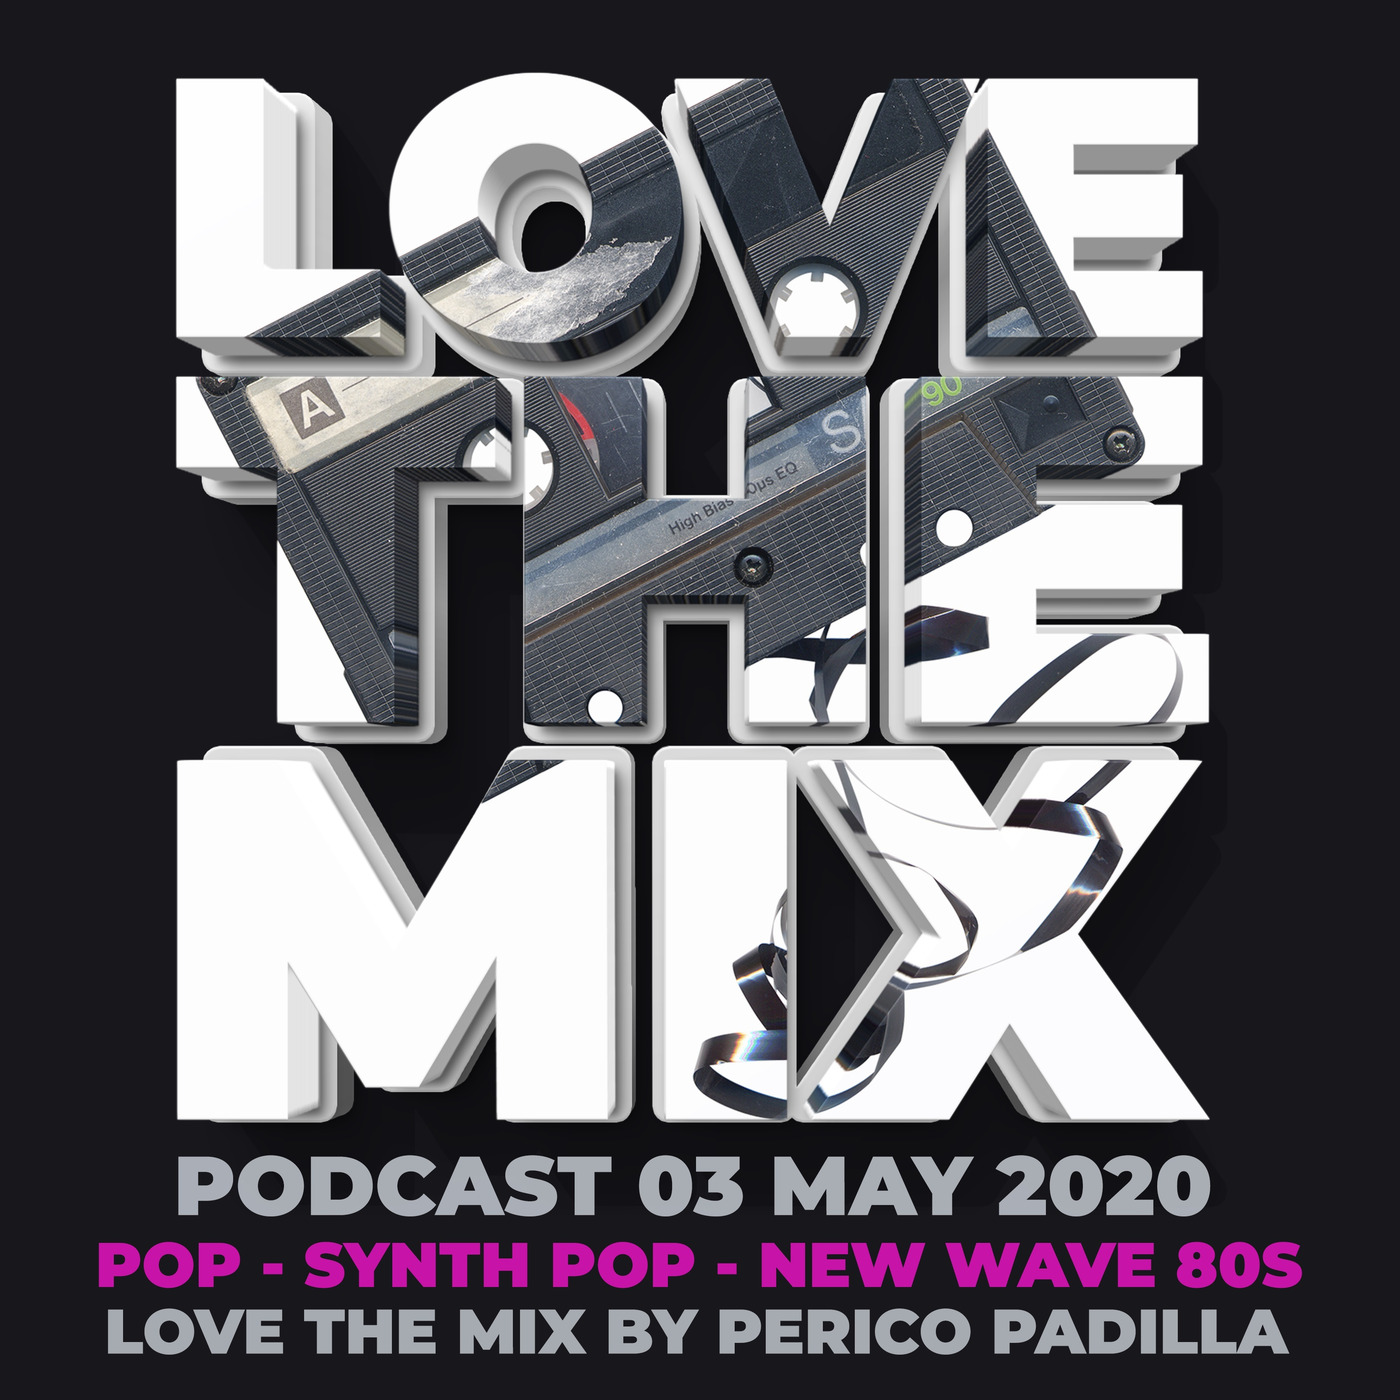 LOVE THE MIX PODCAST 80S - POP | SYNTH POP | NEW WAVE | 03 MAY 2020 By Perico Padilla